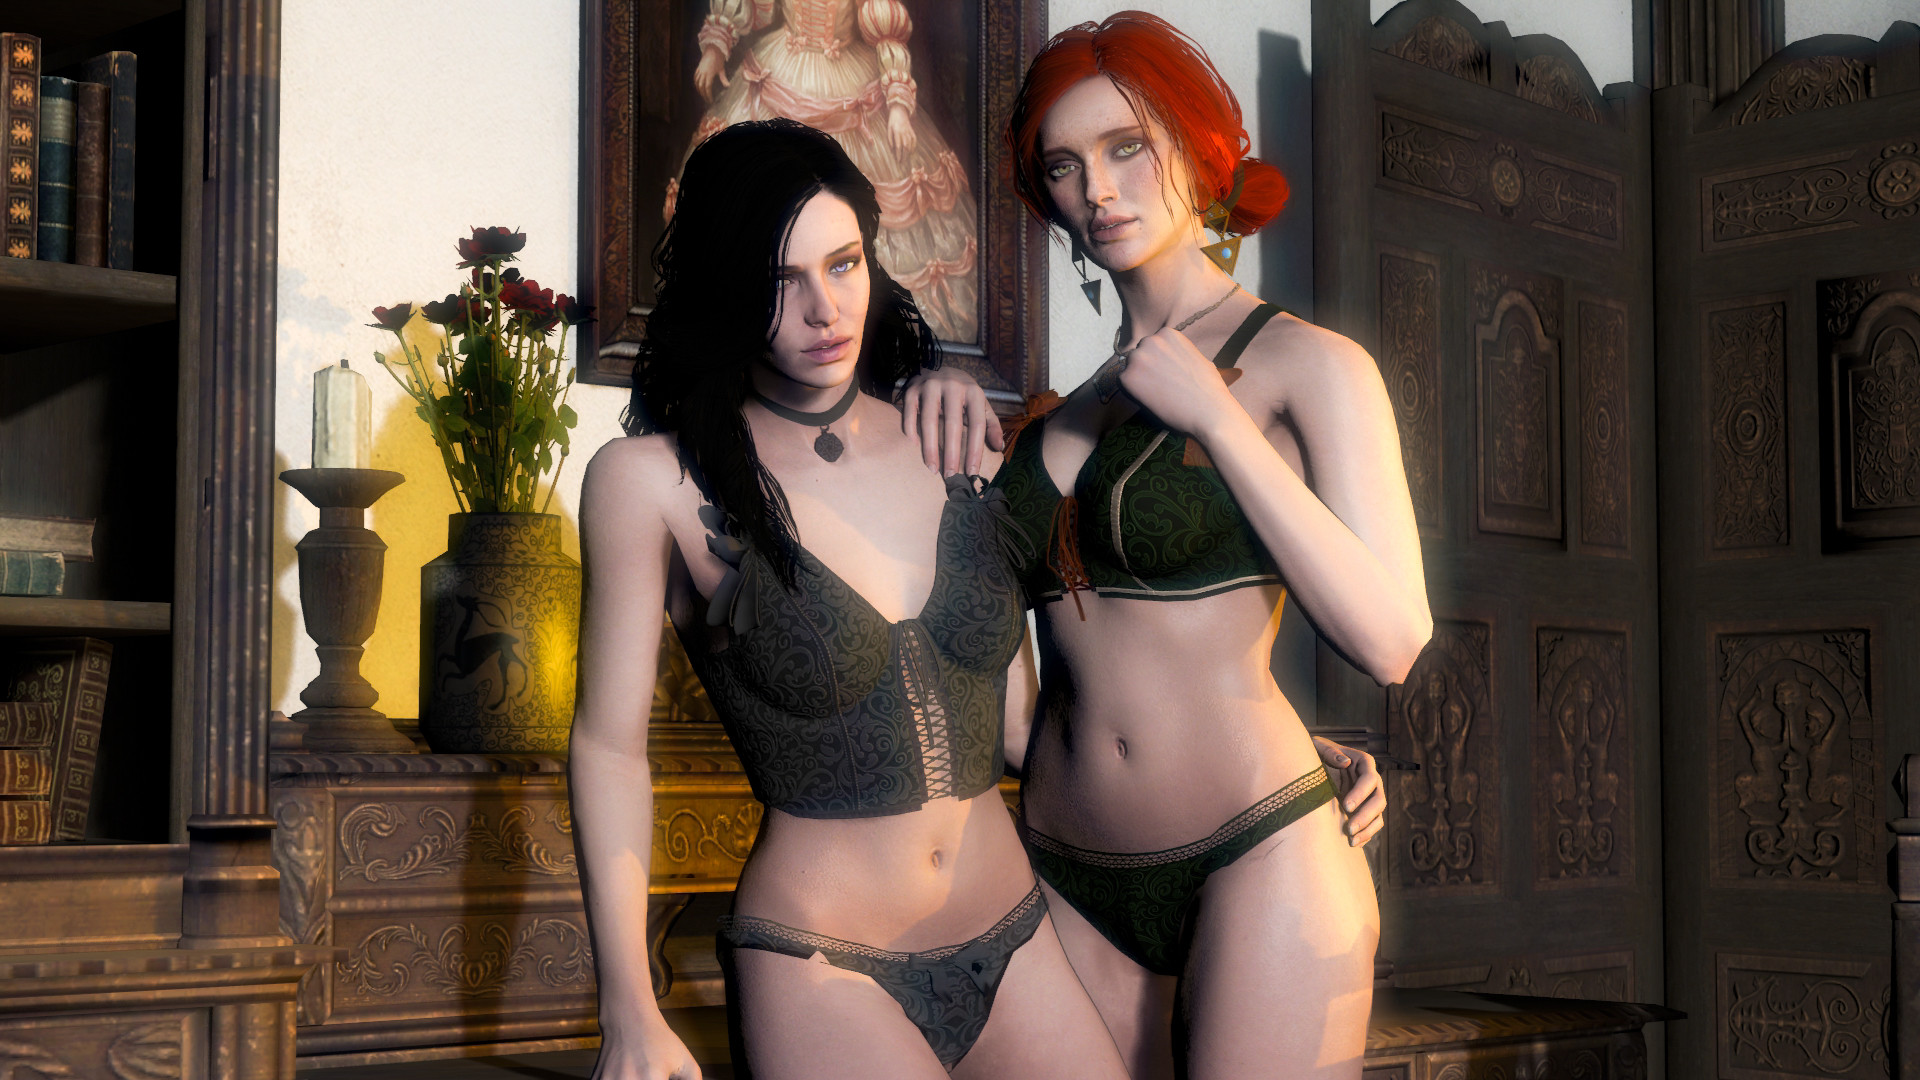 Yennifer and triss after threesome